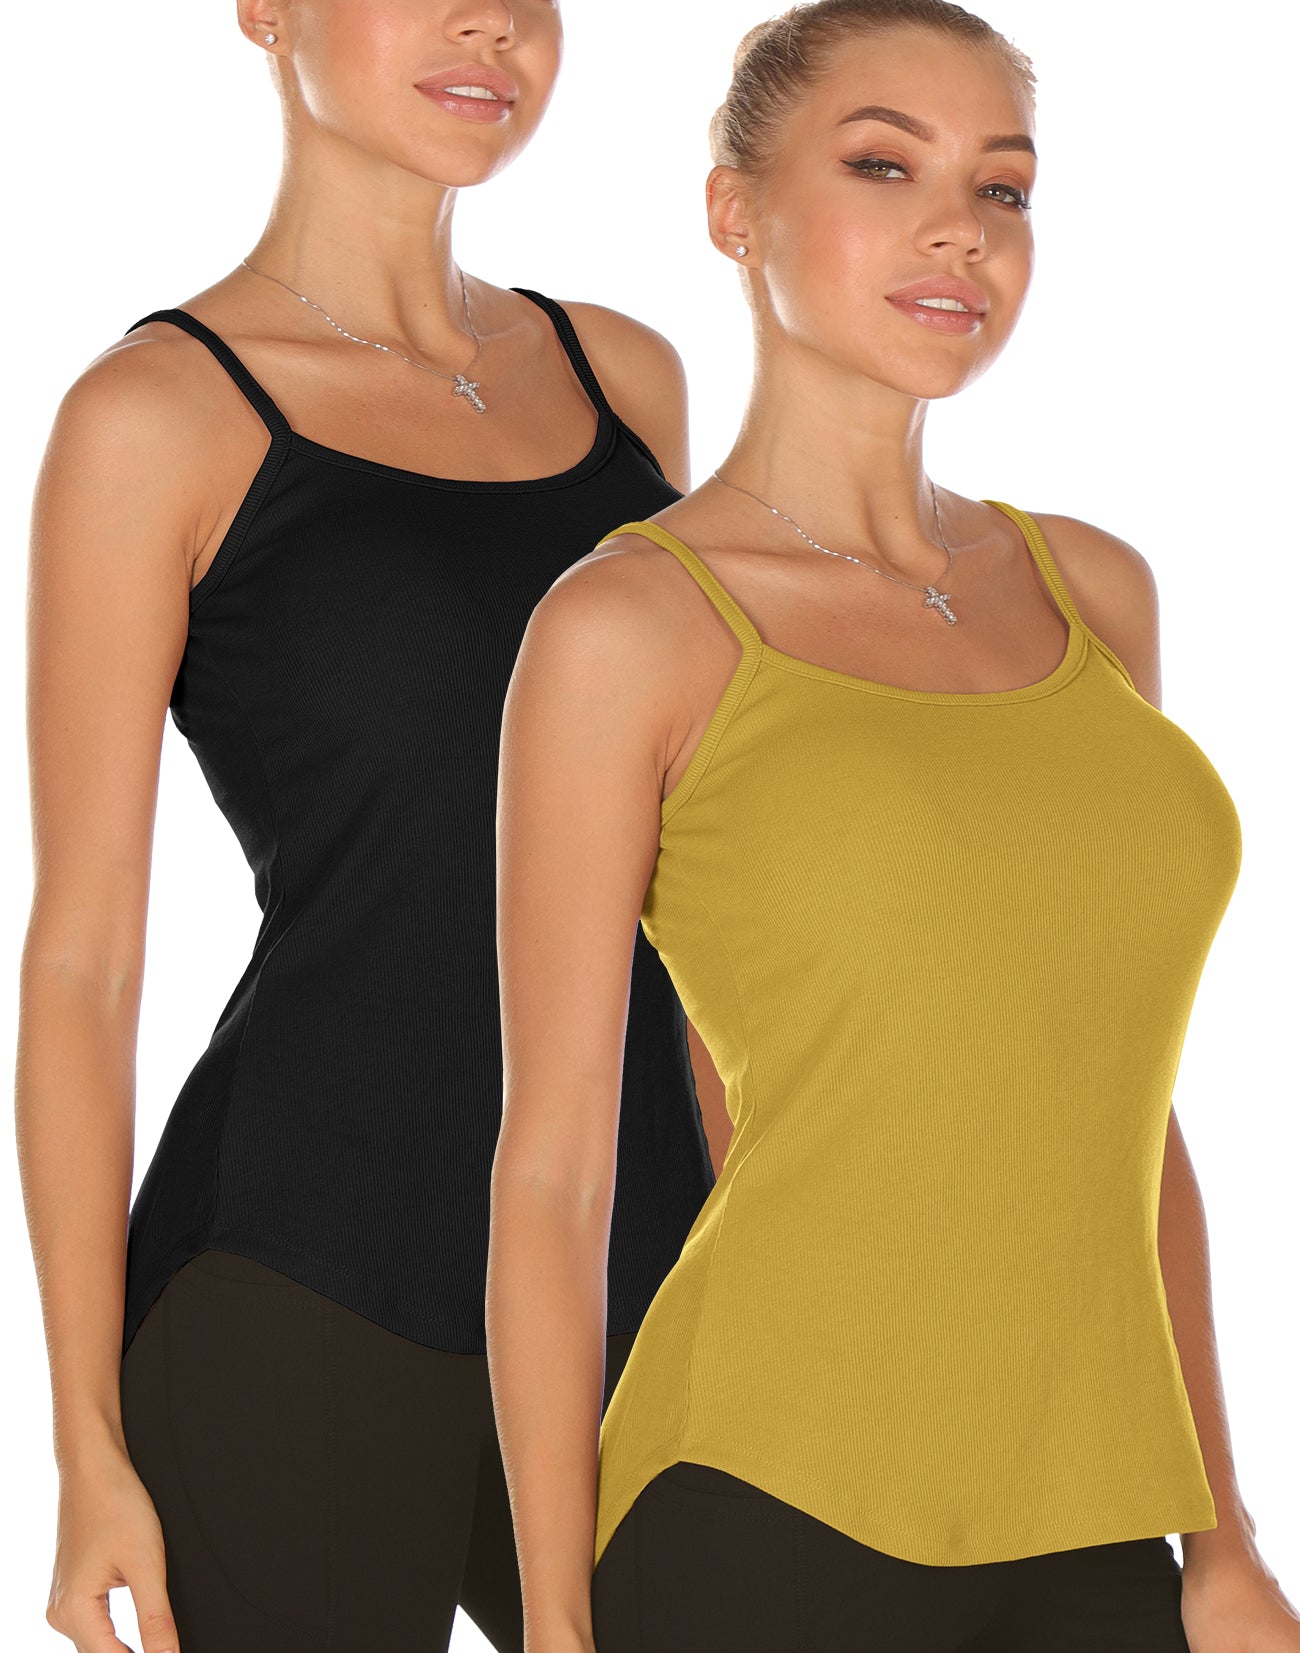 icyzone Undershirts Tank Tops for Women - Spaghetti Adjustable Strap Cami  Tops(Pack of 2)